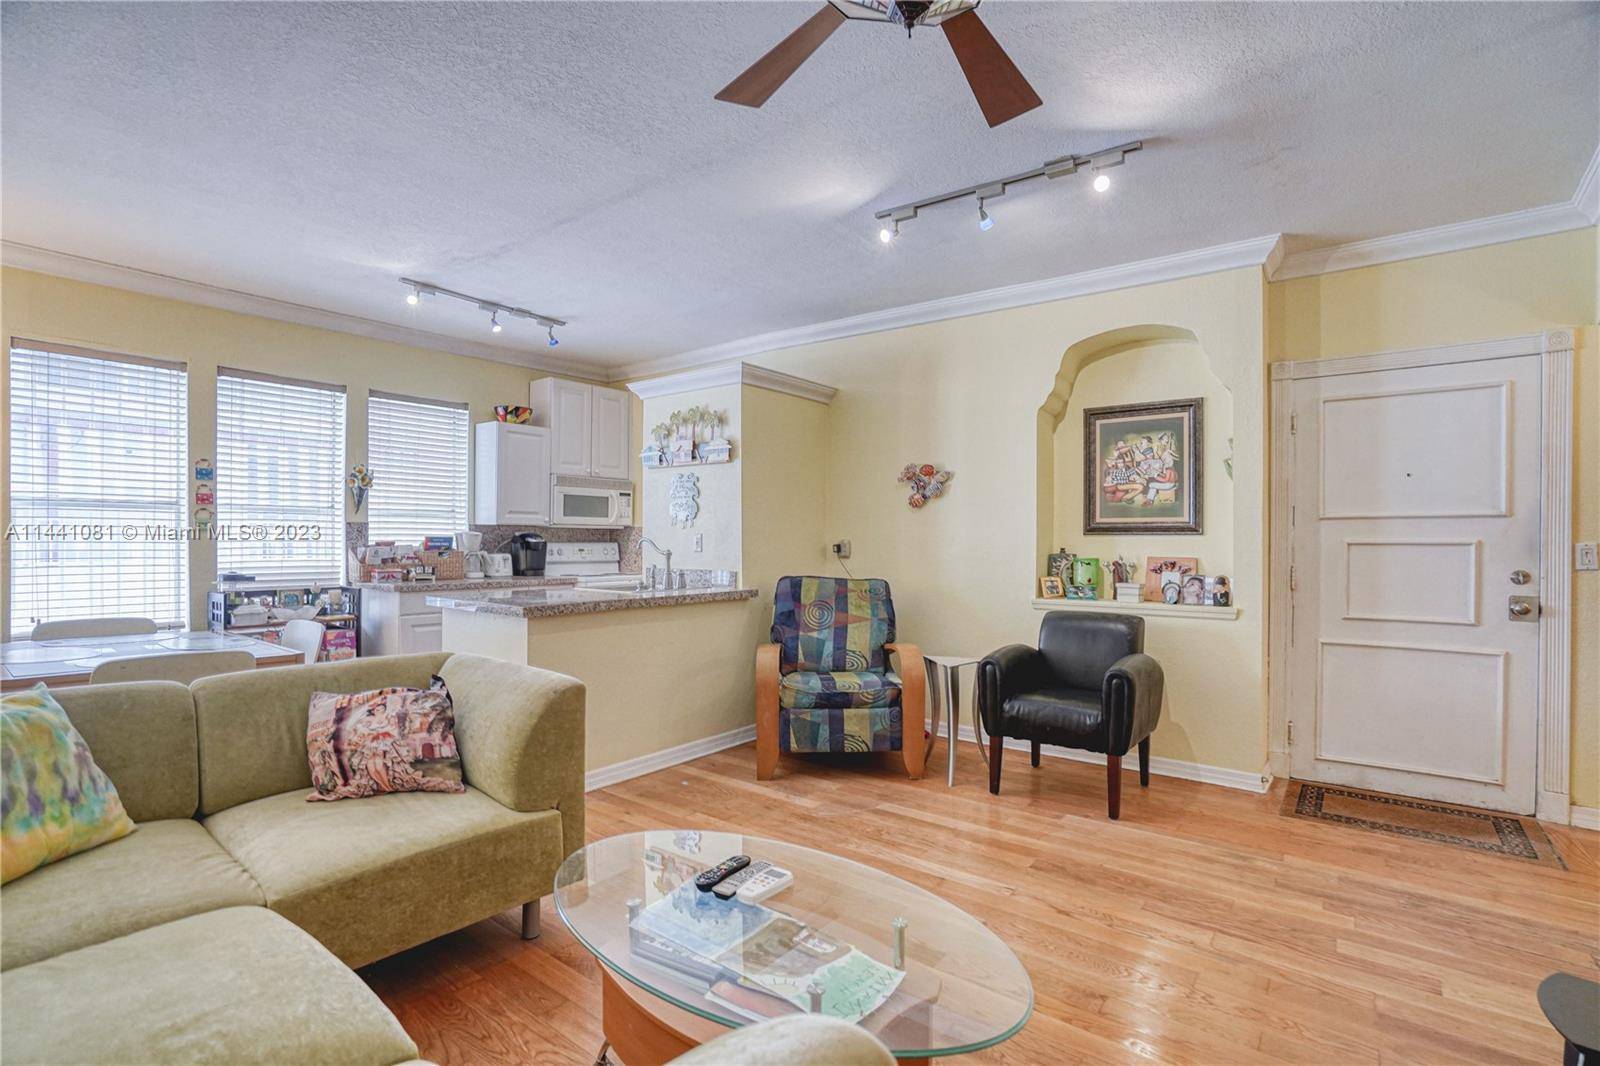 Sunlit and charming corner two bedroom condo featuring wood flooring, central a c, an updated kitchen, and conveniently located on the 1st floor.